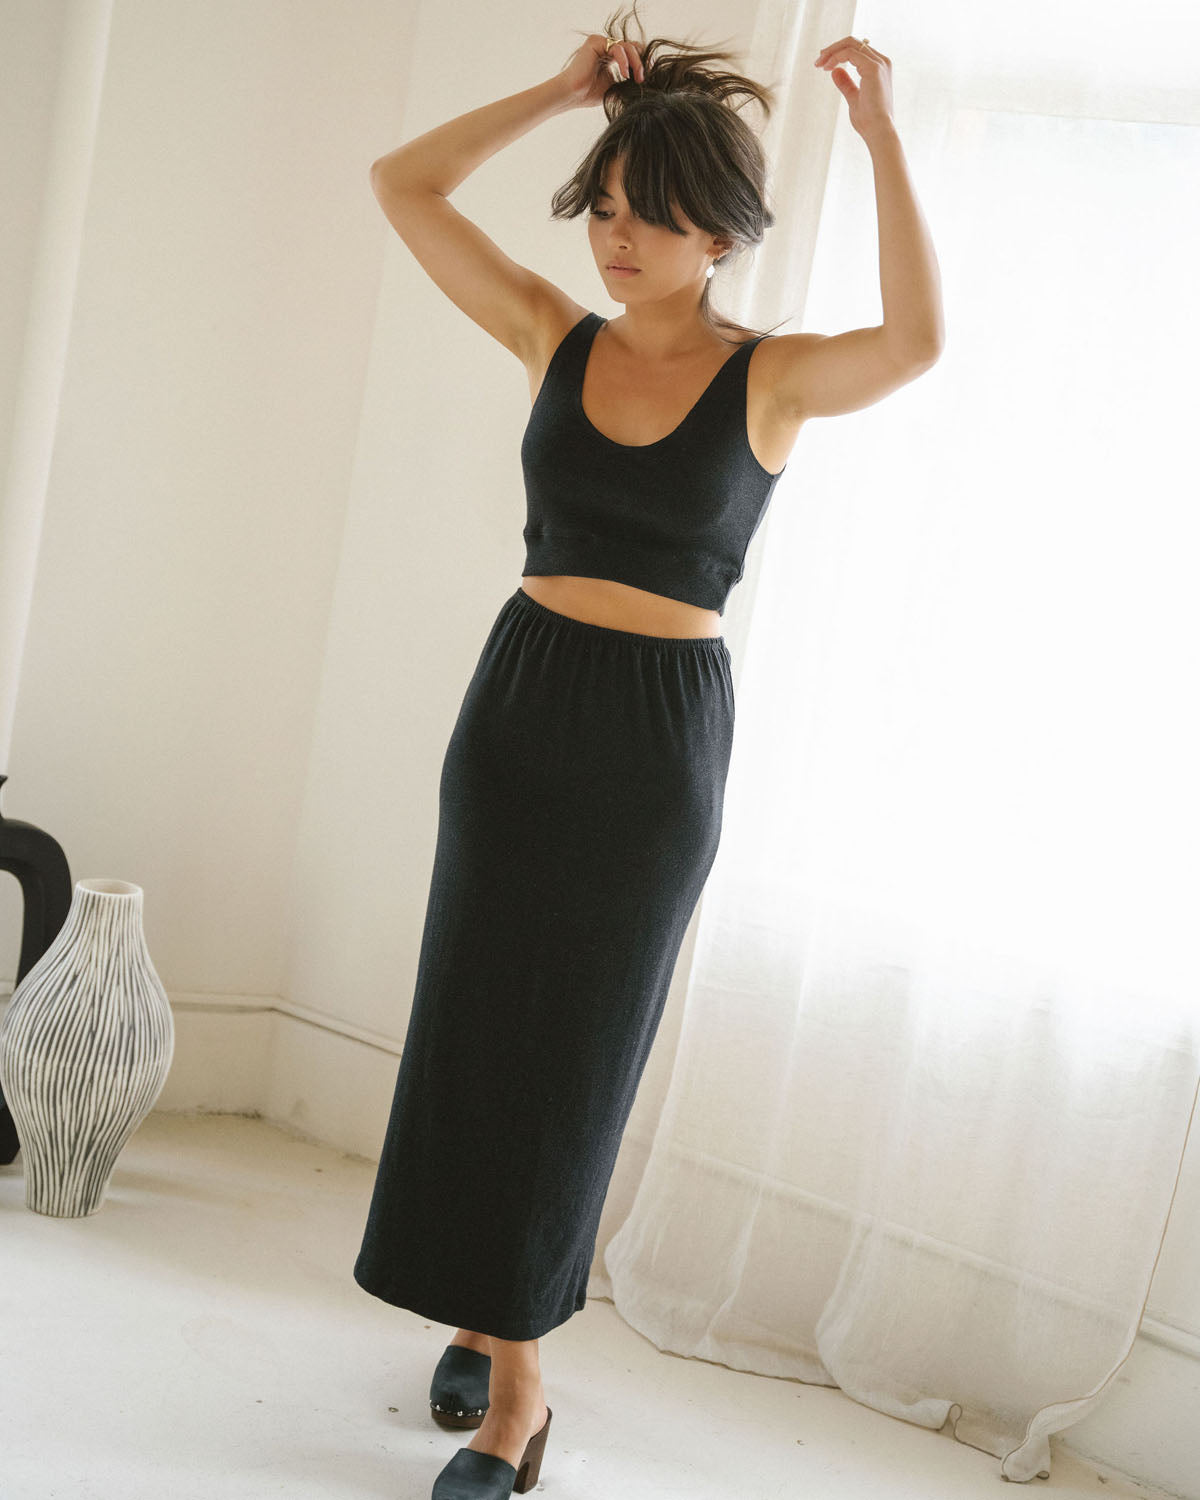 black knit stretchy skirt with elastic waistband and back slit